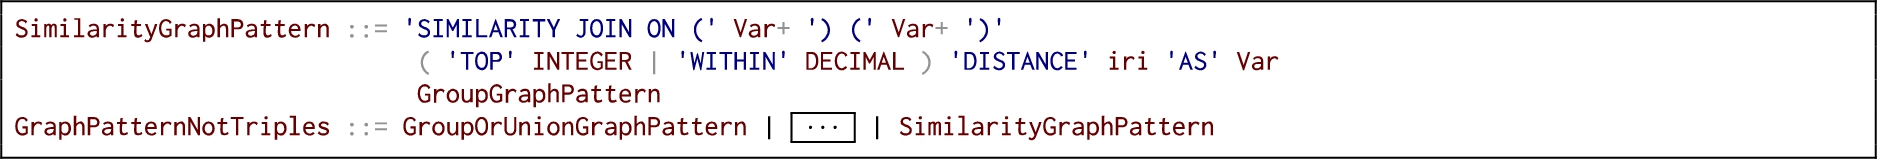 The extended production rules from SPARQL 1.1 to support similarity joins.